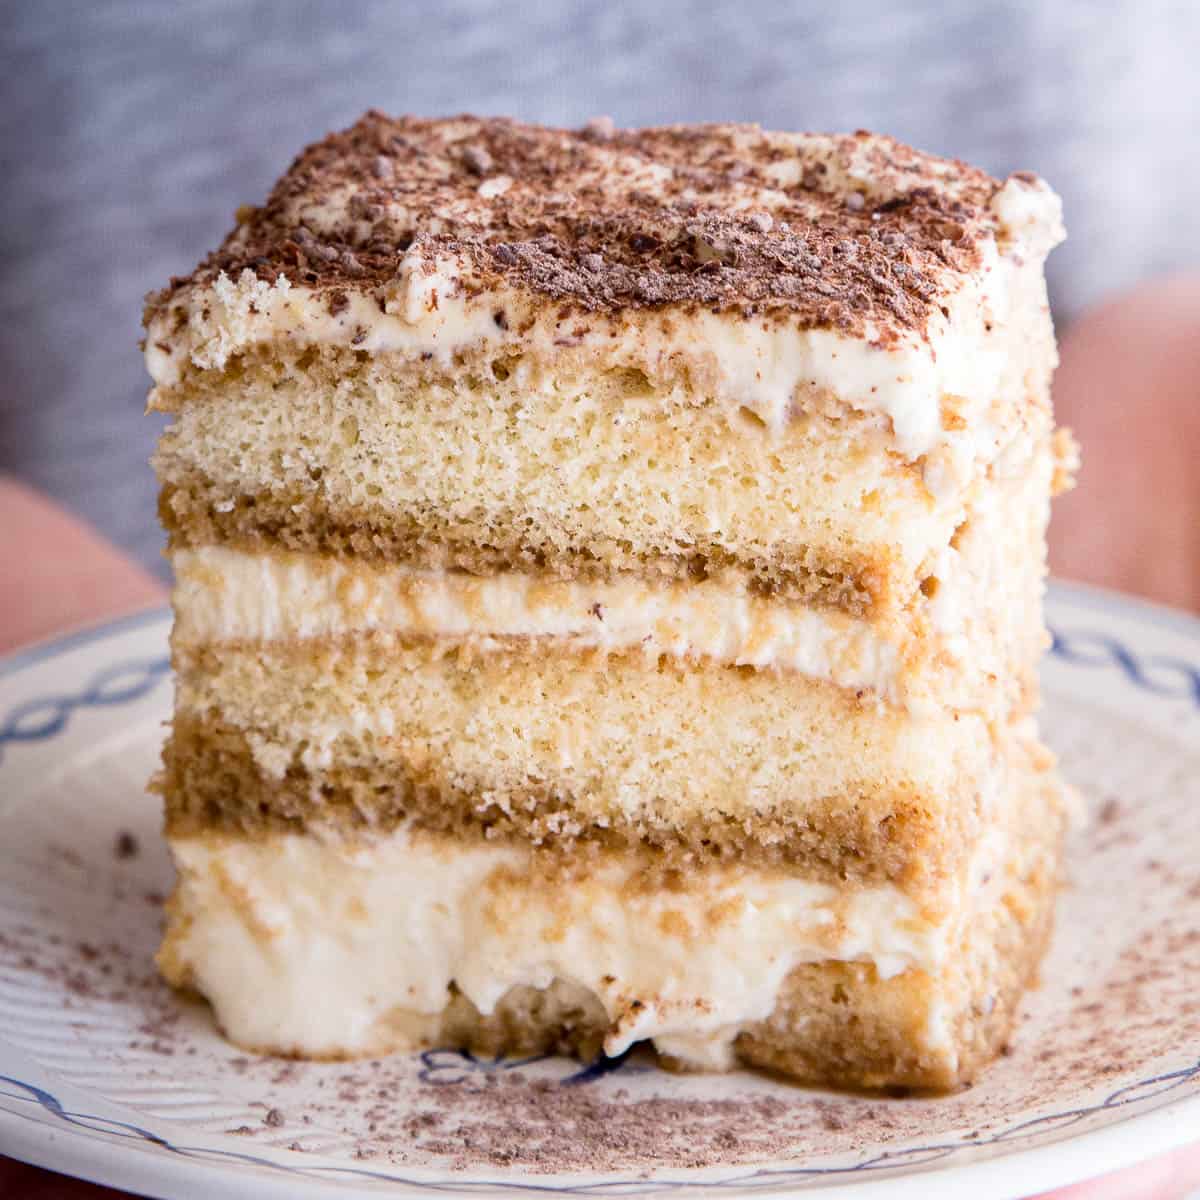 Close up shot of tiramisu showing three layers of coffee soaked biscuits and whipped cream.